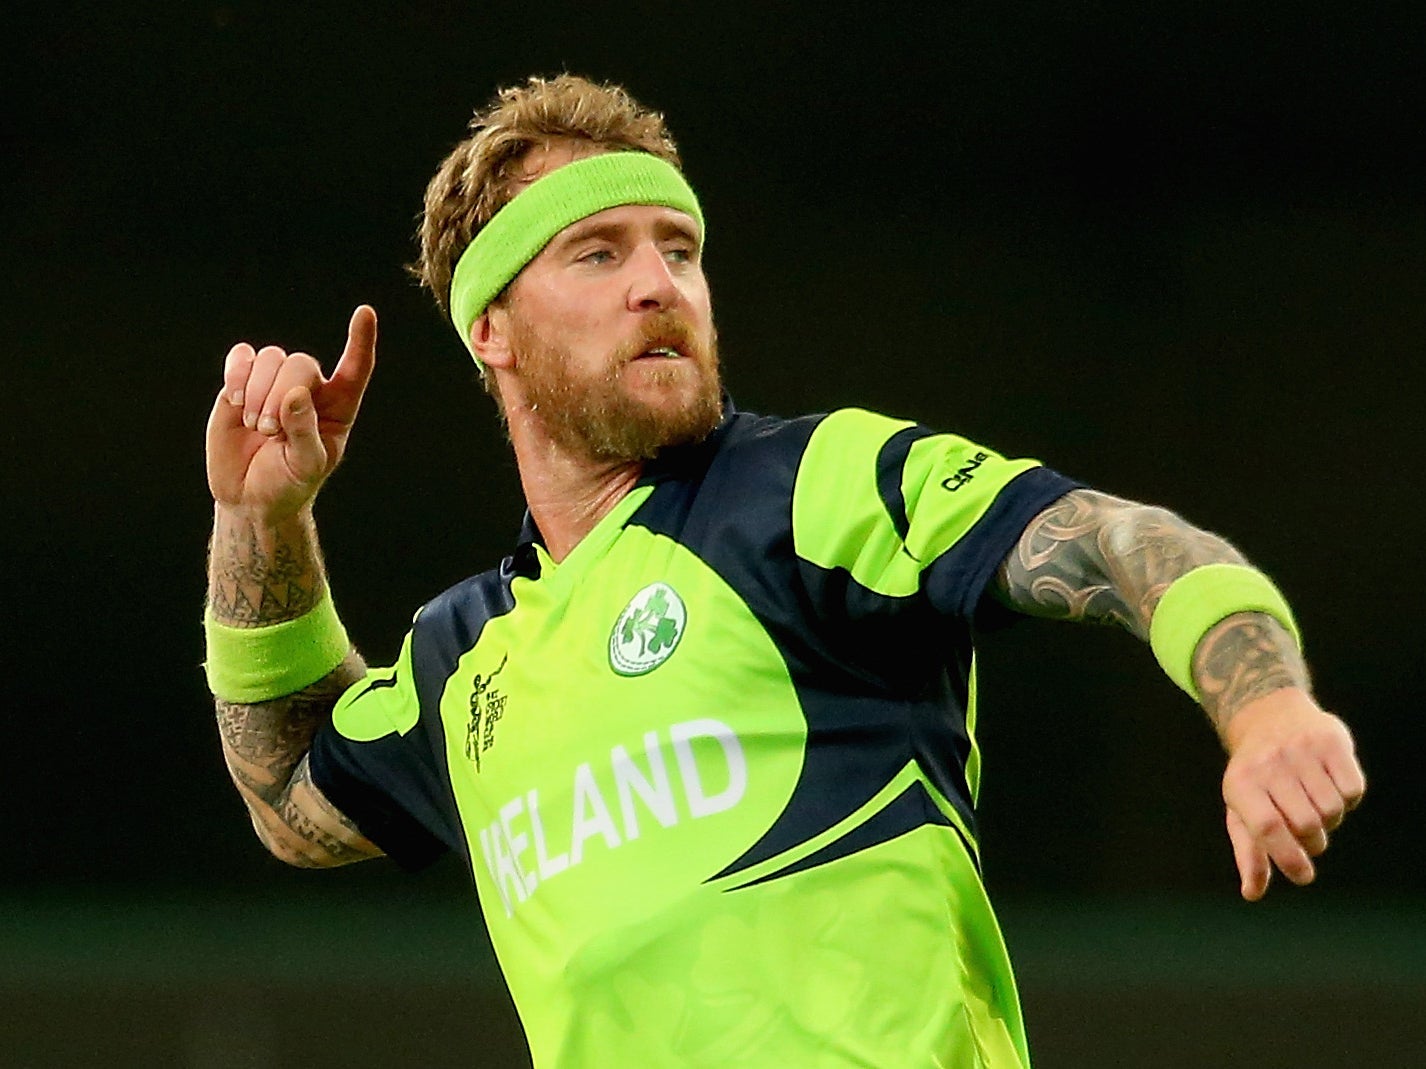 Ireland have appeared at the last three Cricket World Cups